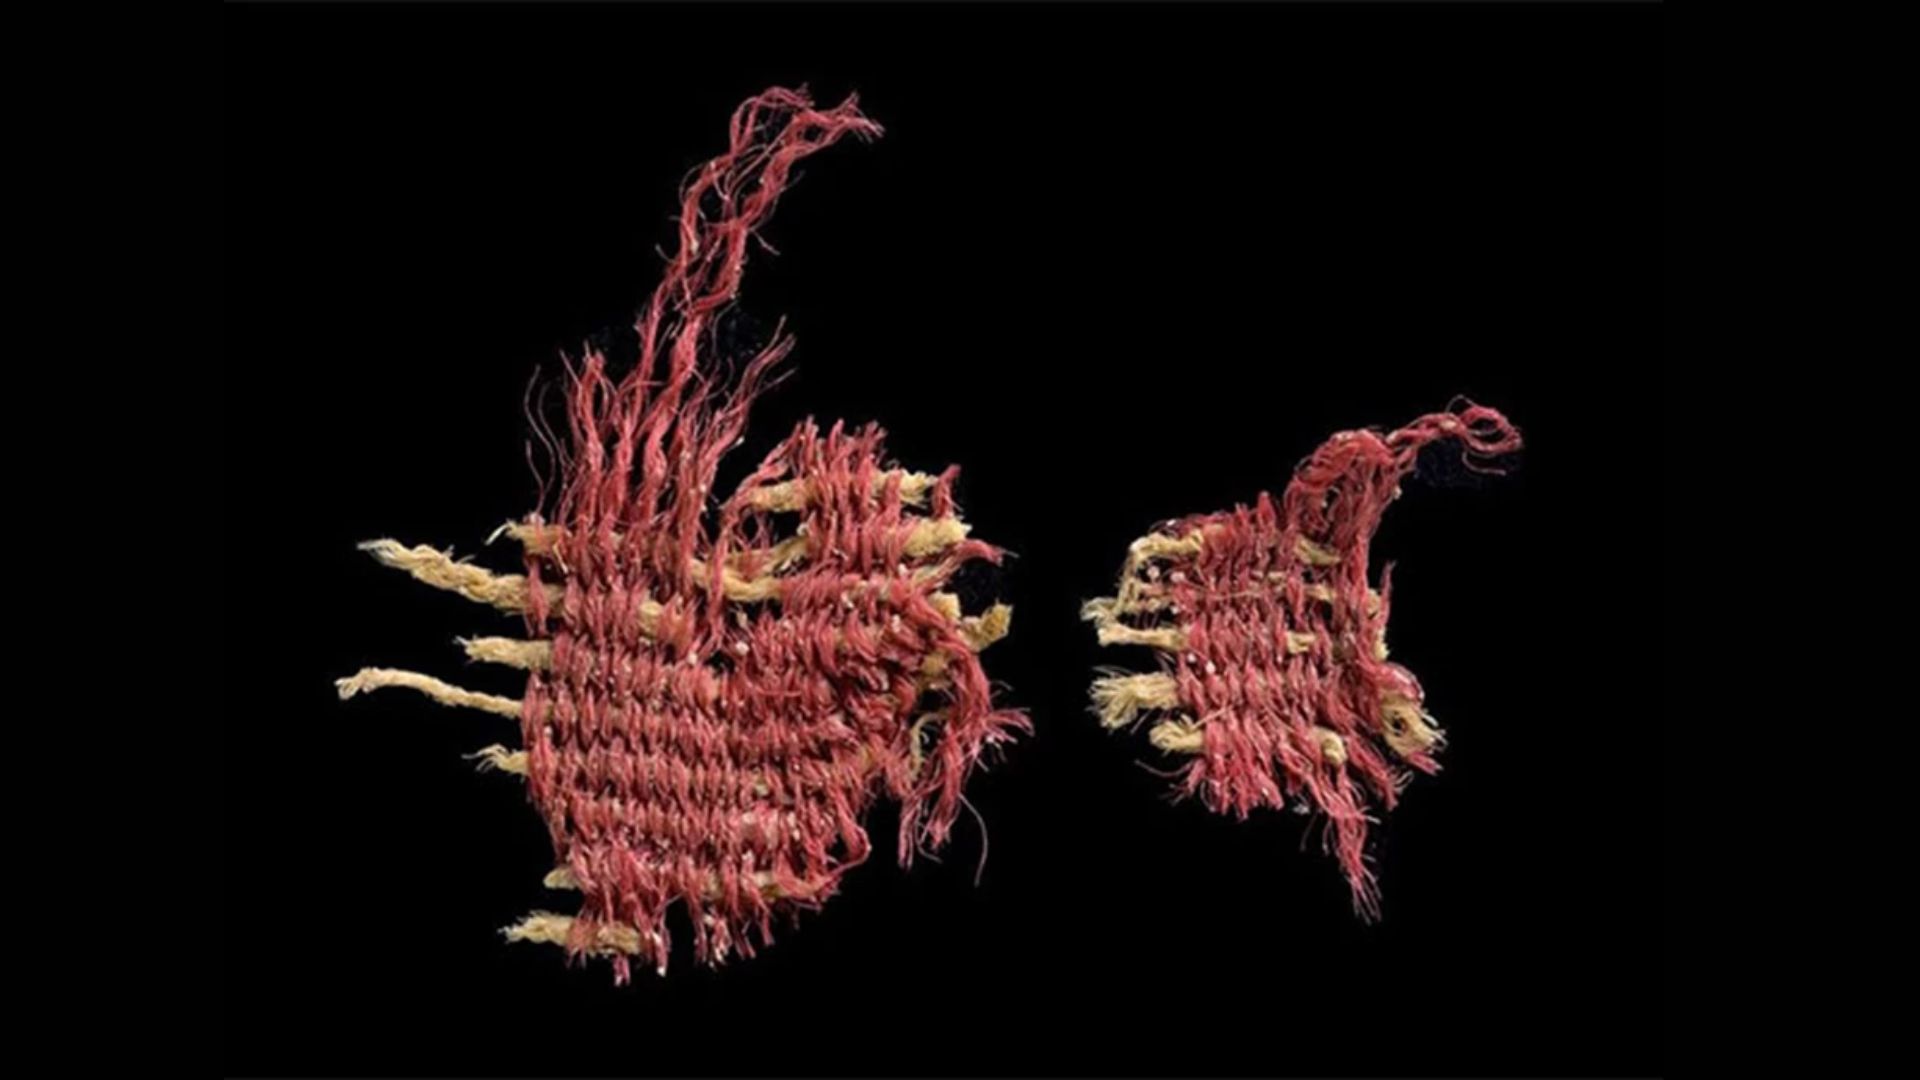 Israeli Archaeologists Discover 3,800-Year-Old Red Textile with Biblical Scarlet Dye in Judean Desert